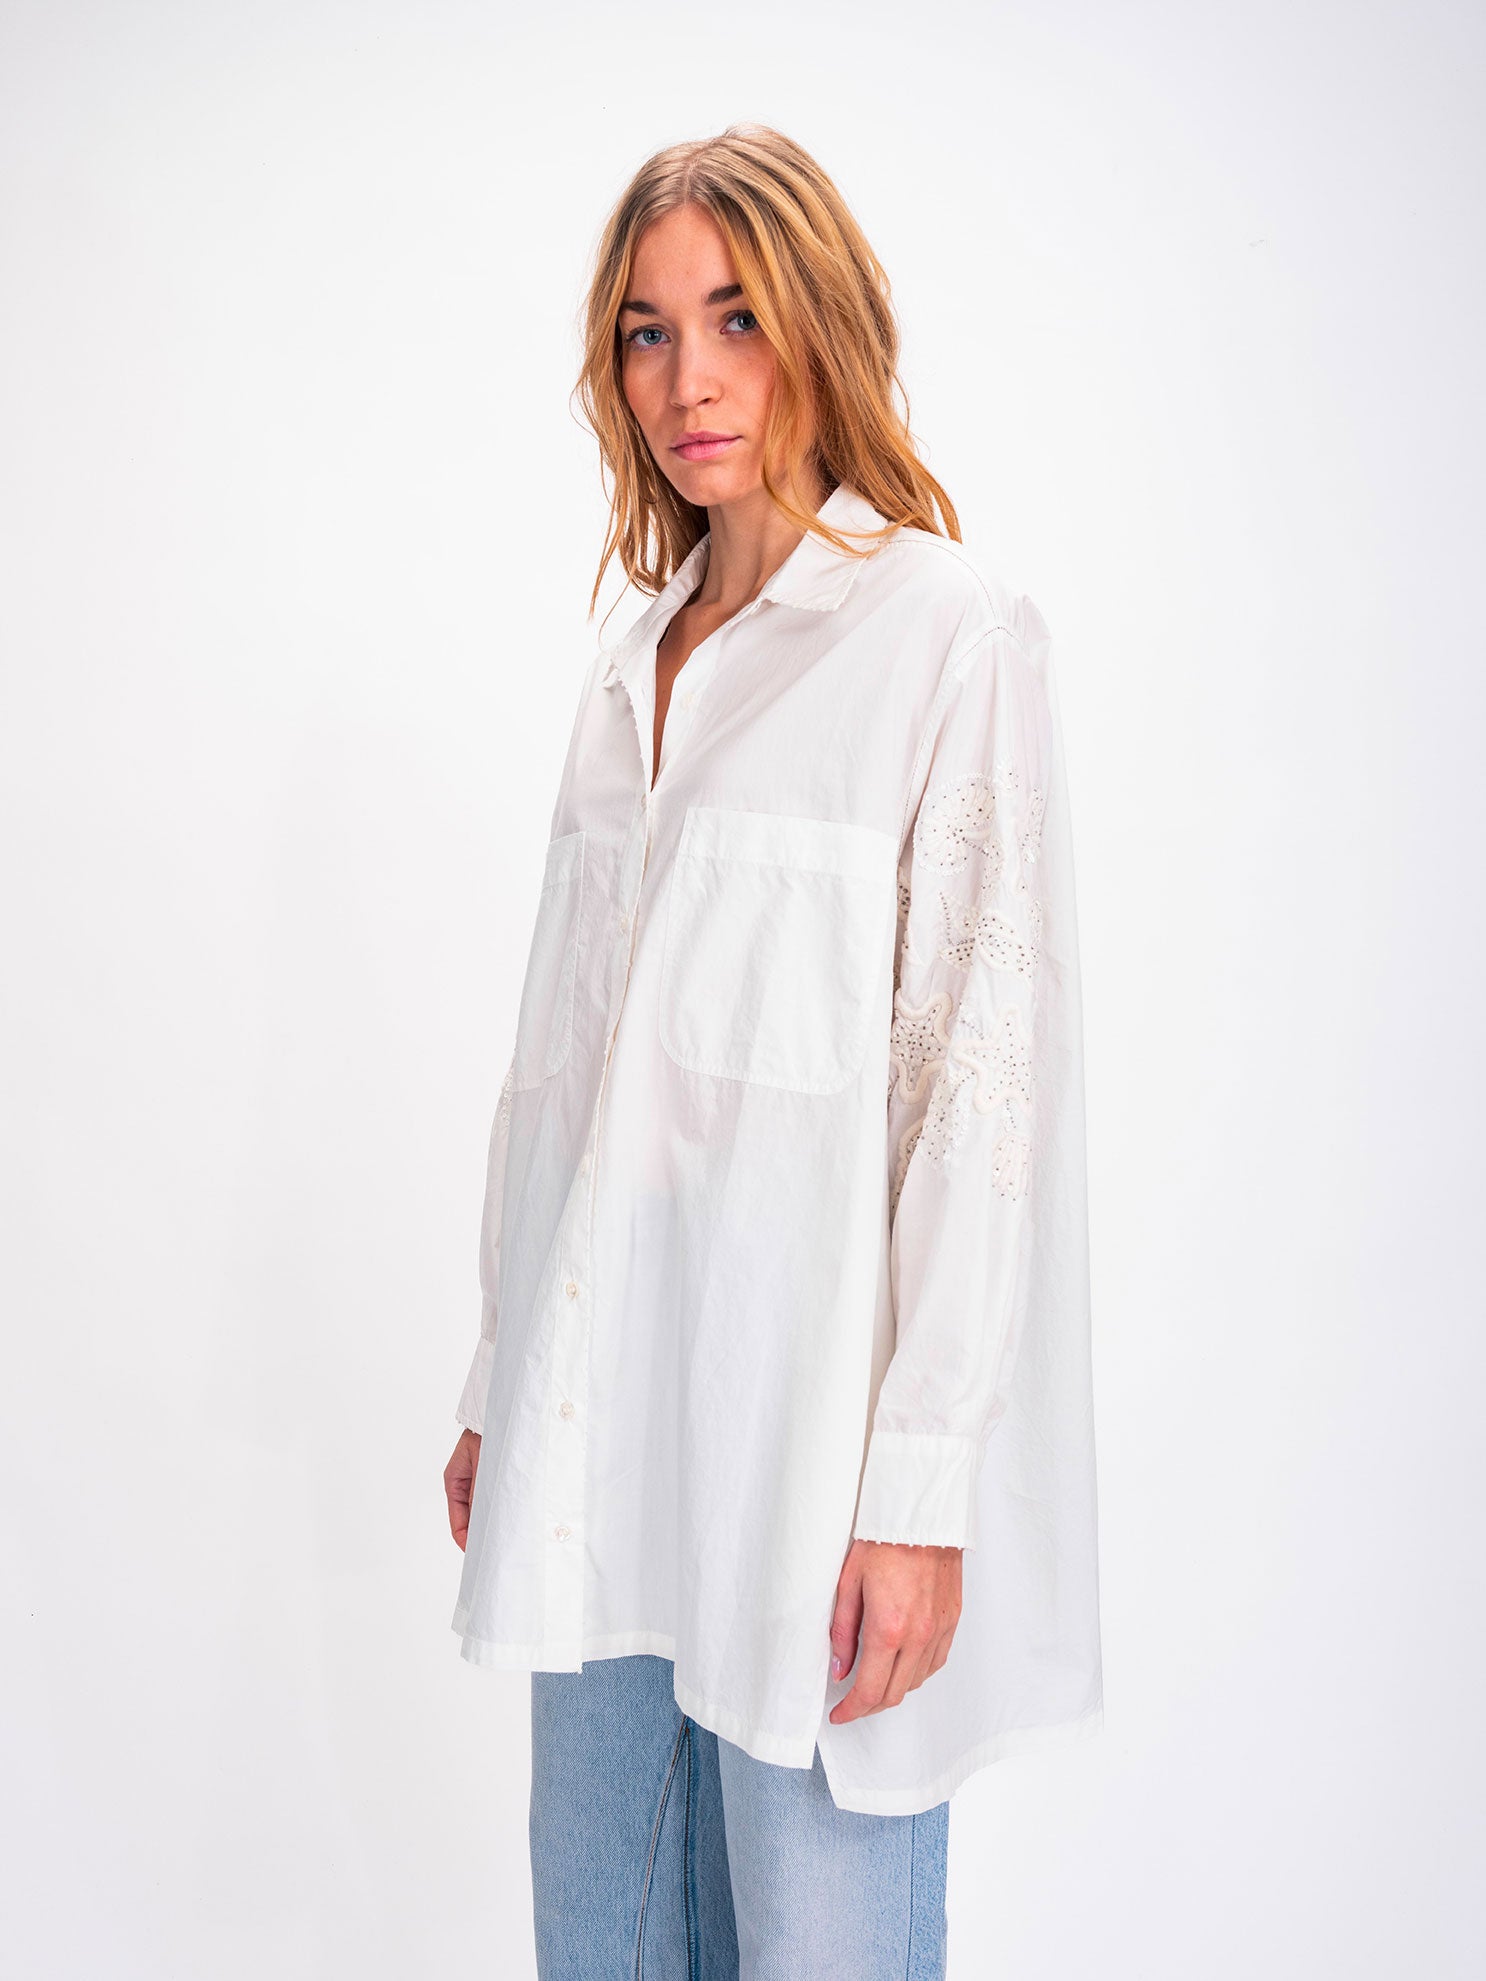 Ogaan embroidered white shirt